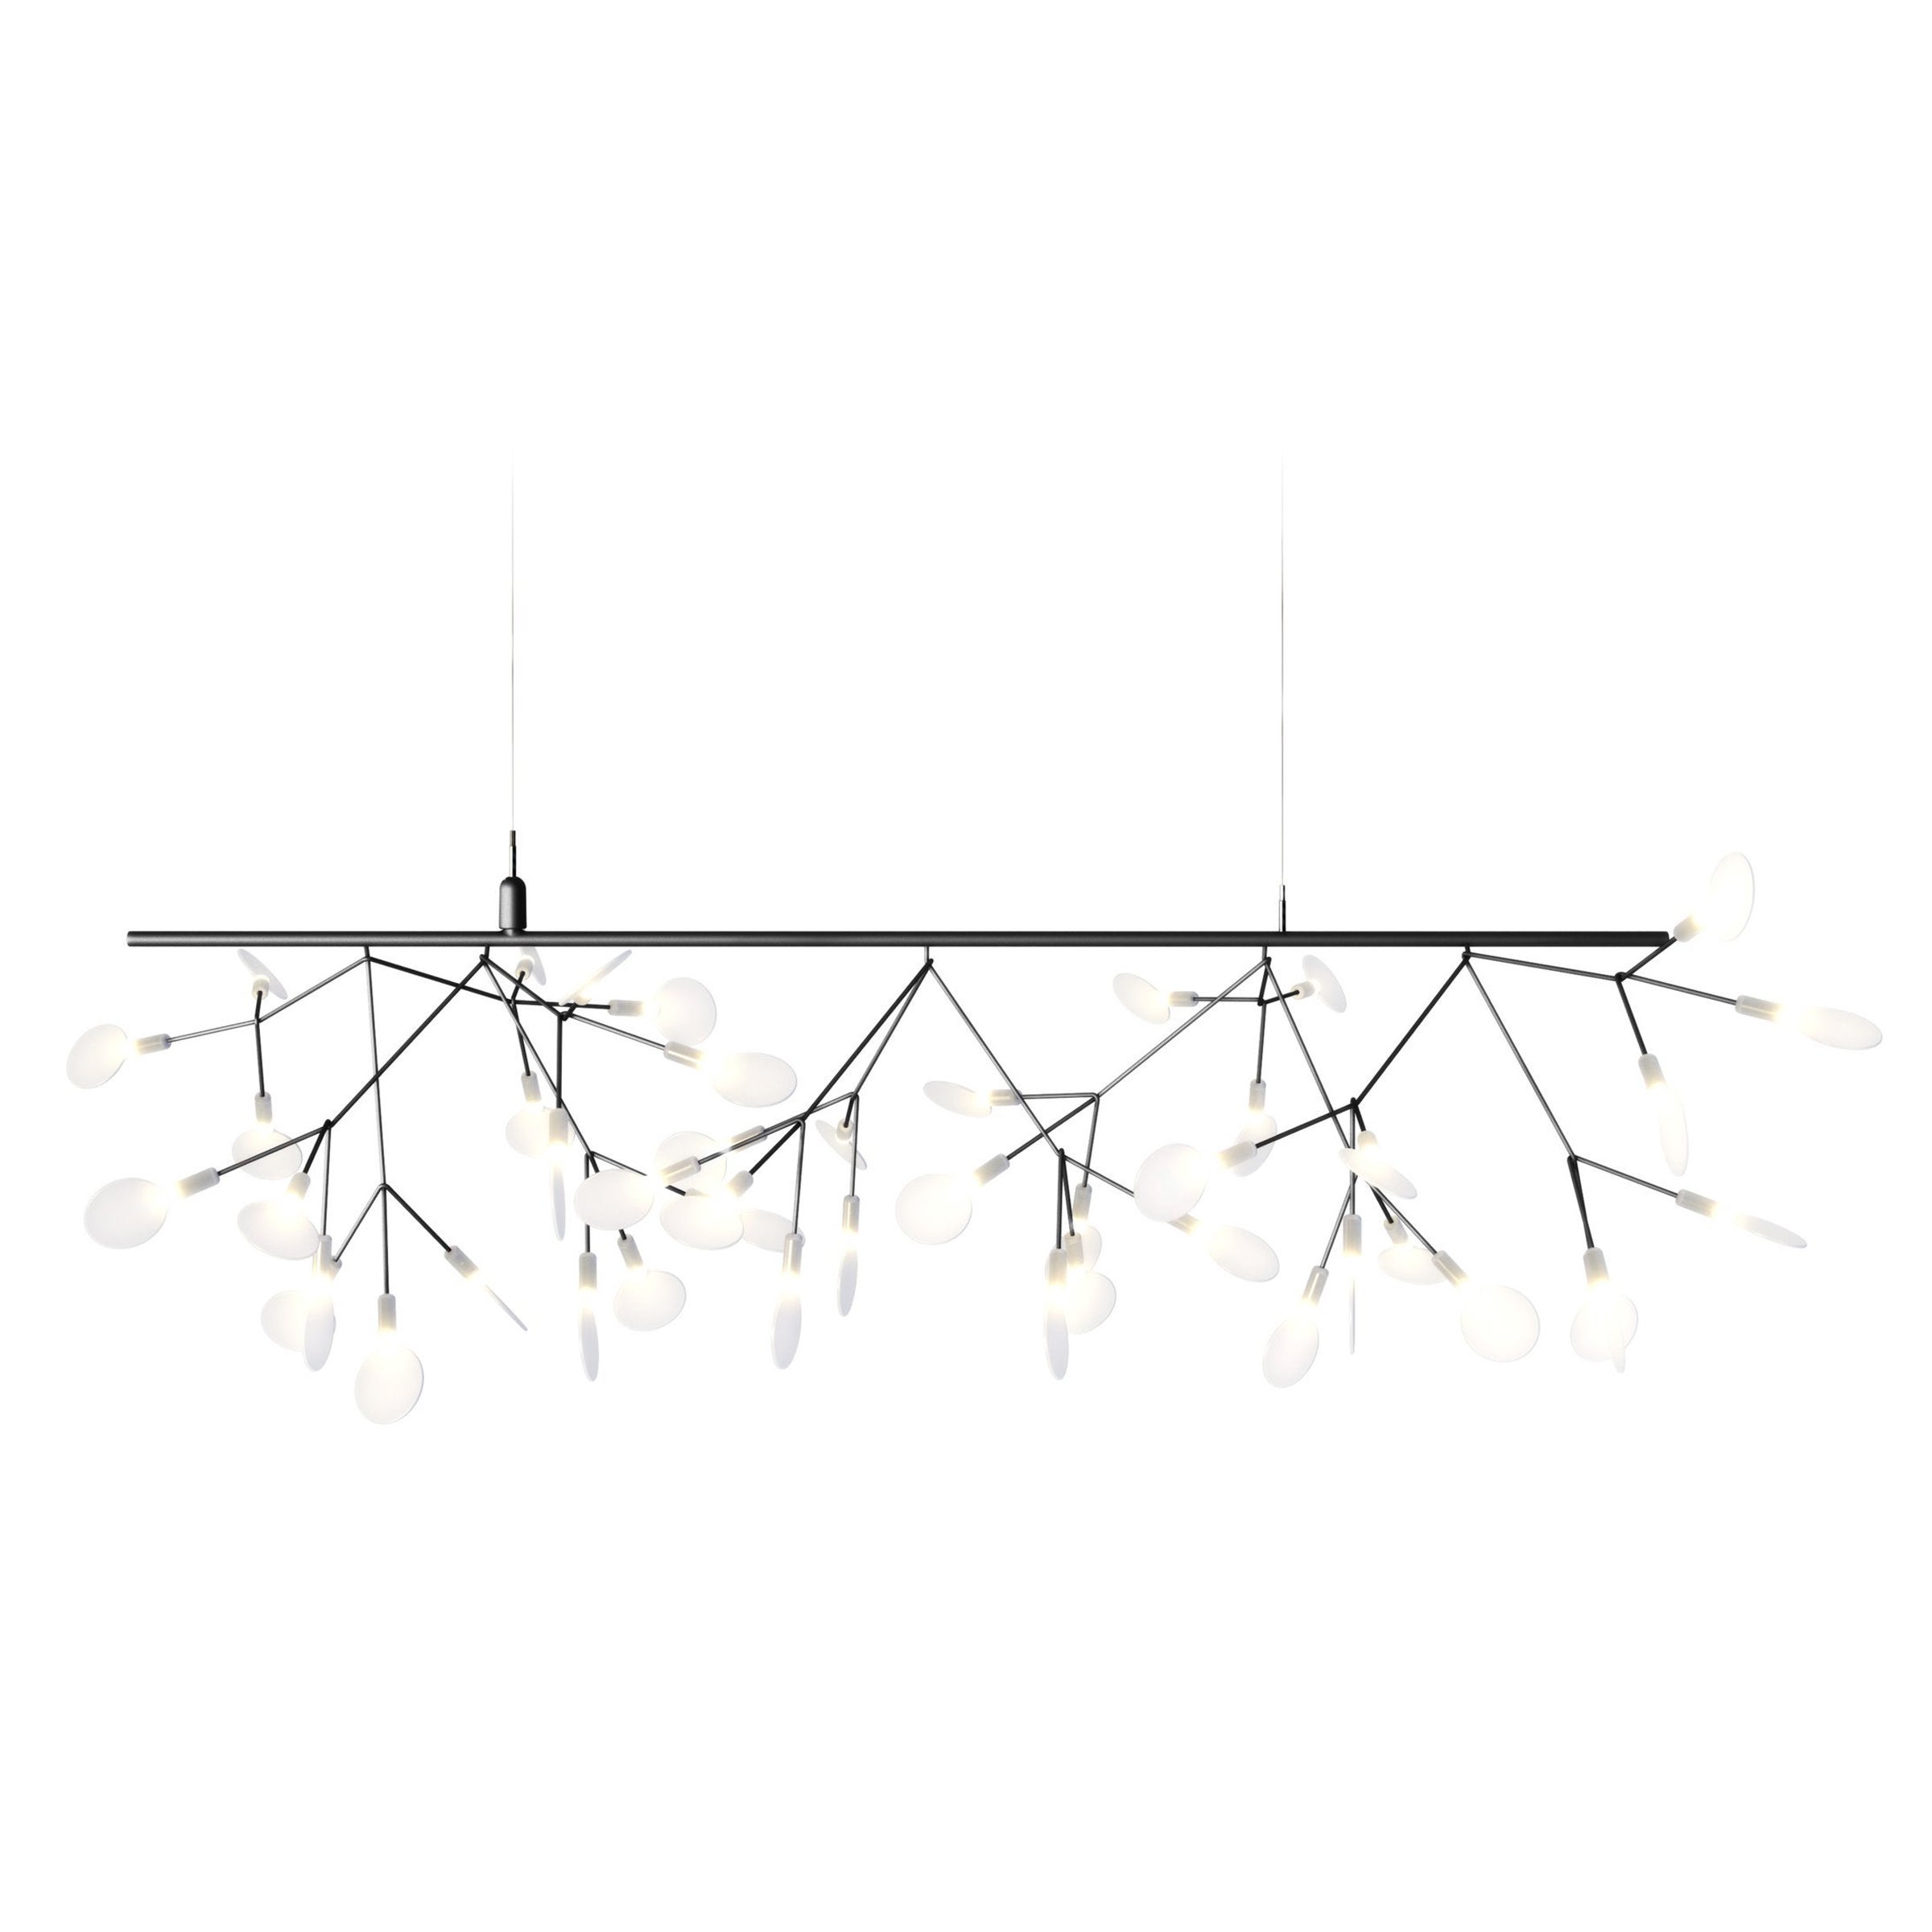 Moooi Heracleum Endless Suspension Lamp in Nickel with Polycarbonate Lenses, 10m